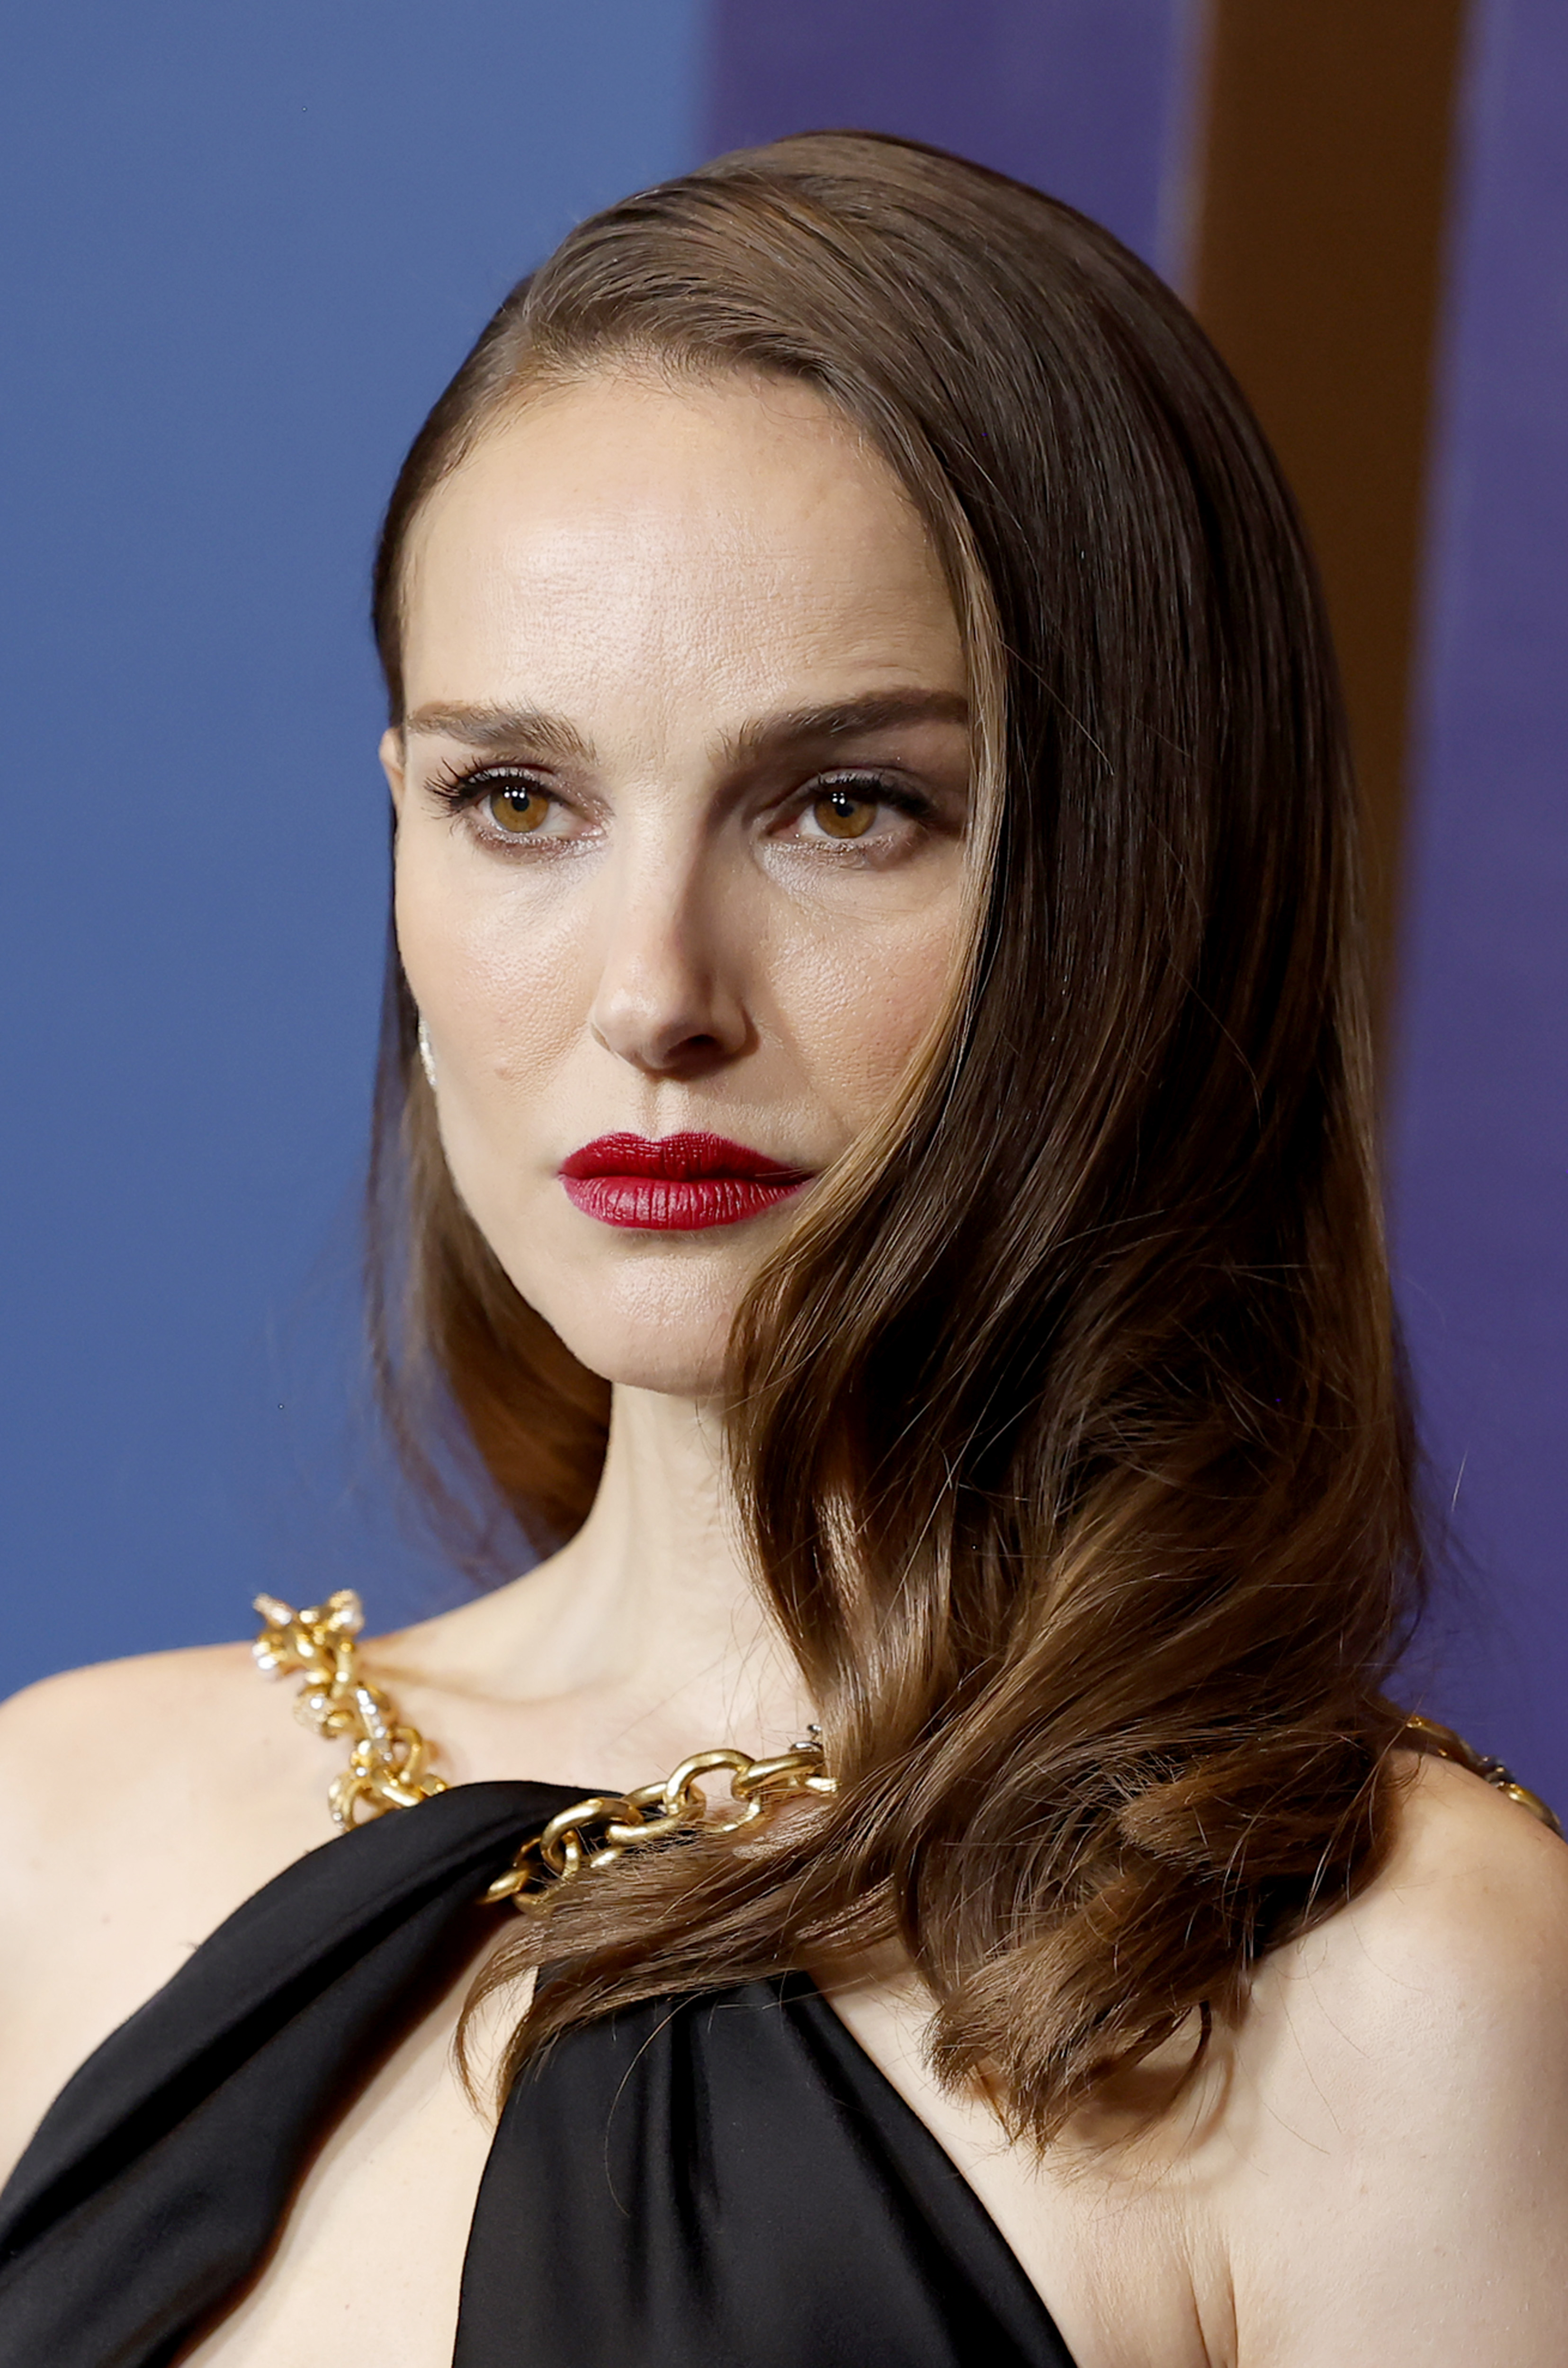 Close-up of Natalie at a media event